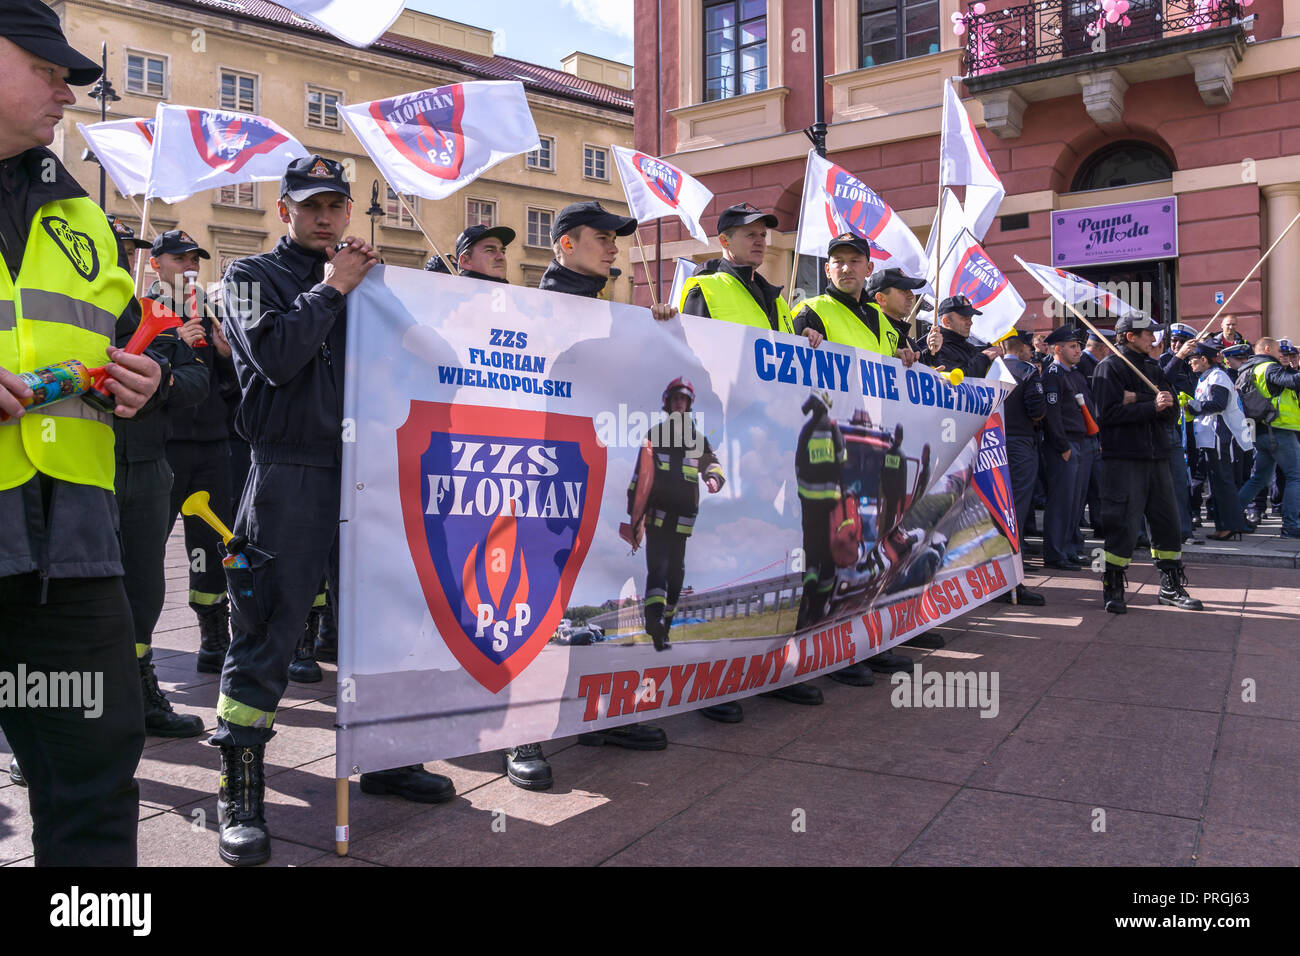 Warsaw, Poland, 2nd Oct, 2018: 30,000 firefighters and members of the Police, Prison Guard and Border Guard protest on streets of the Polish capital against bad working conditions and low pay. Credit: dario photography/Alamy Live News. Stock Photo